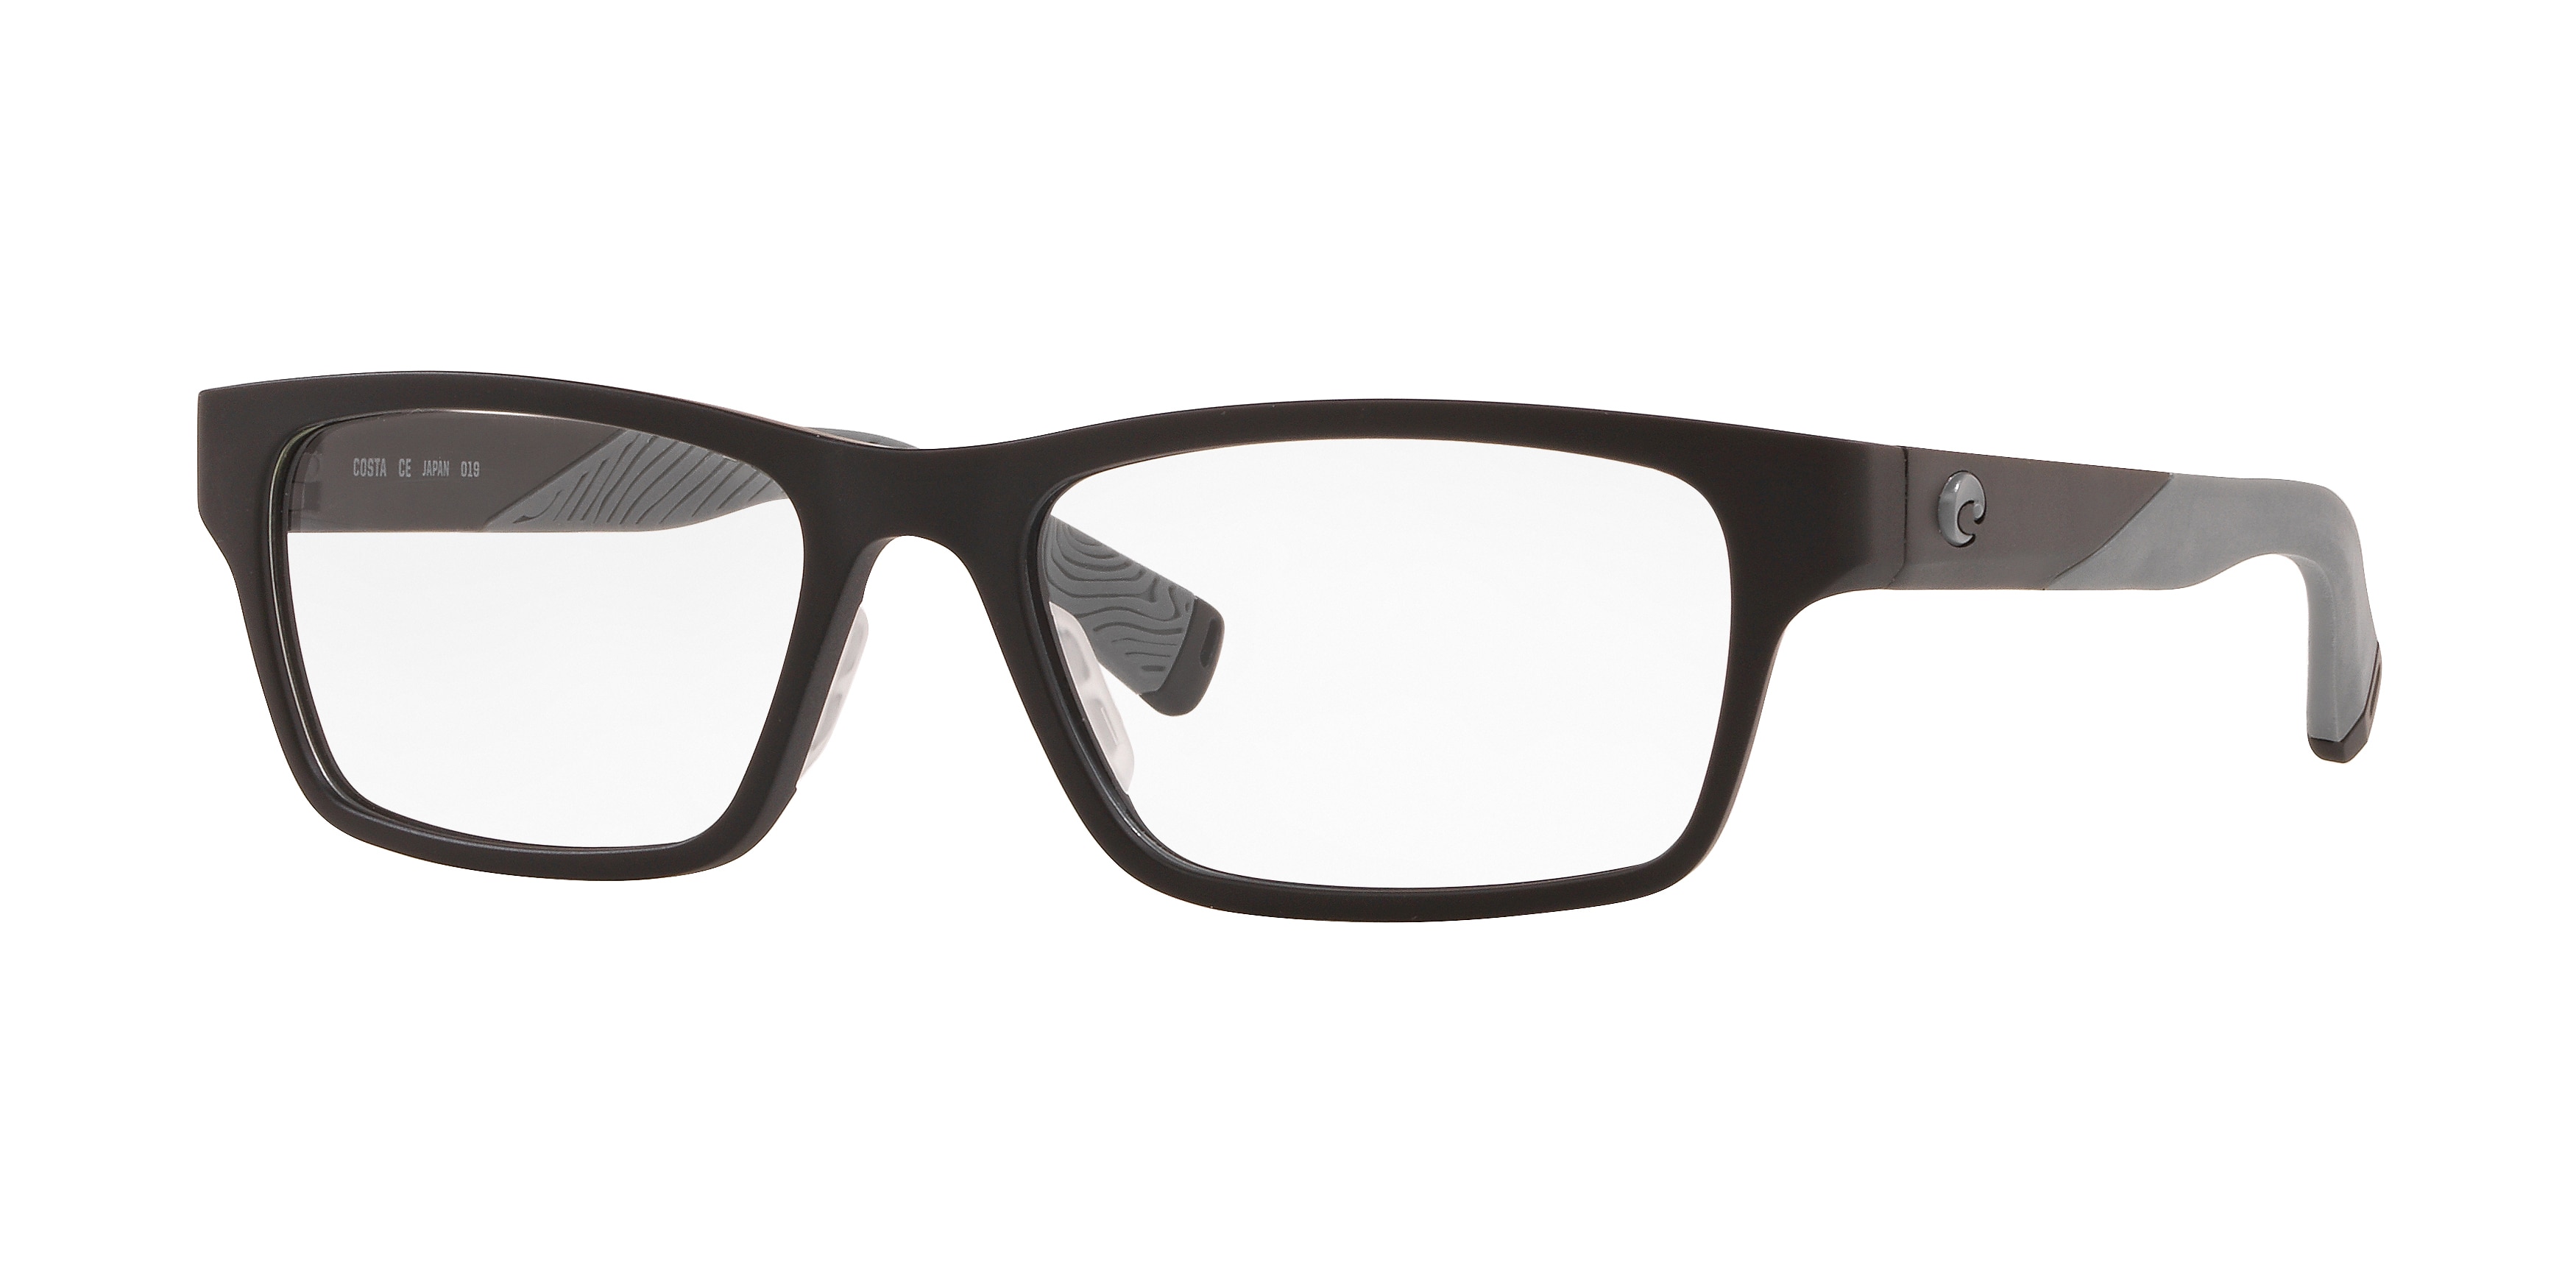  clear/264 mt black frame gray rubber